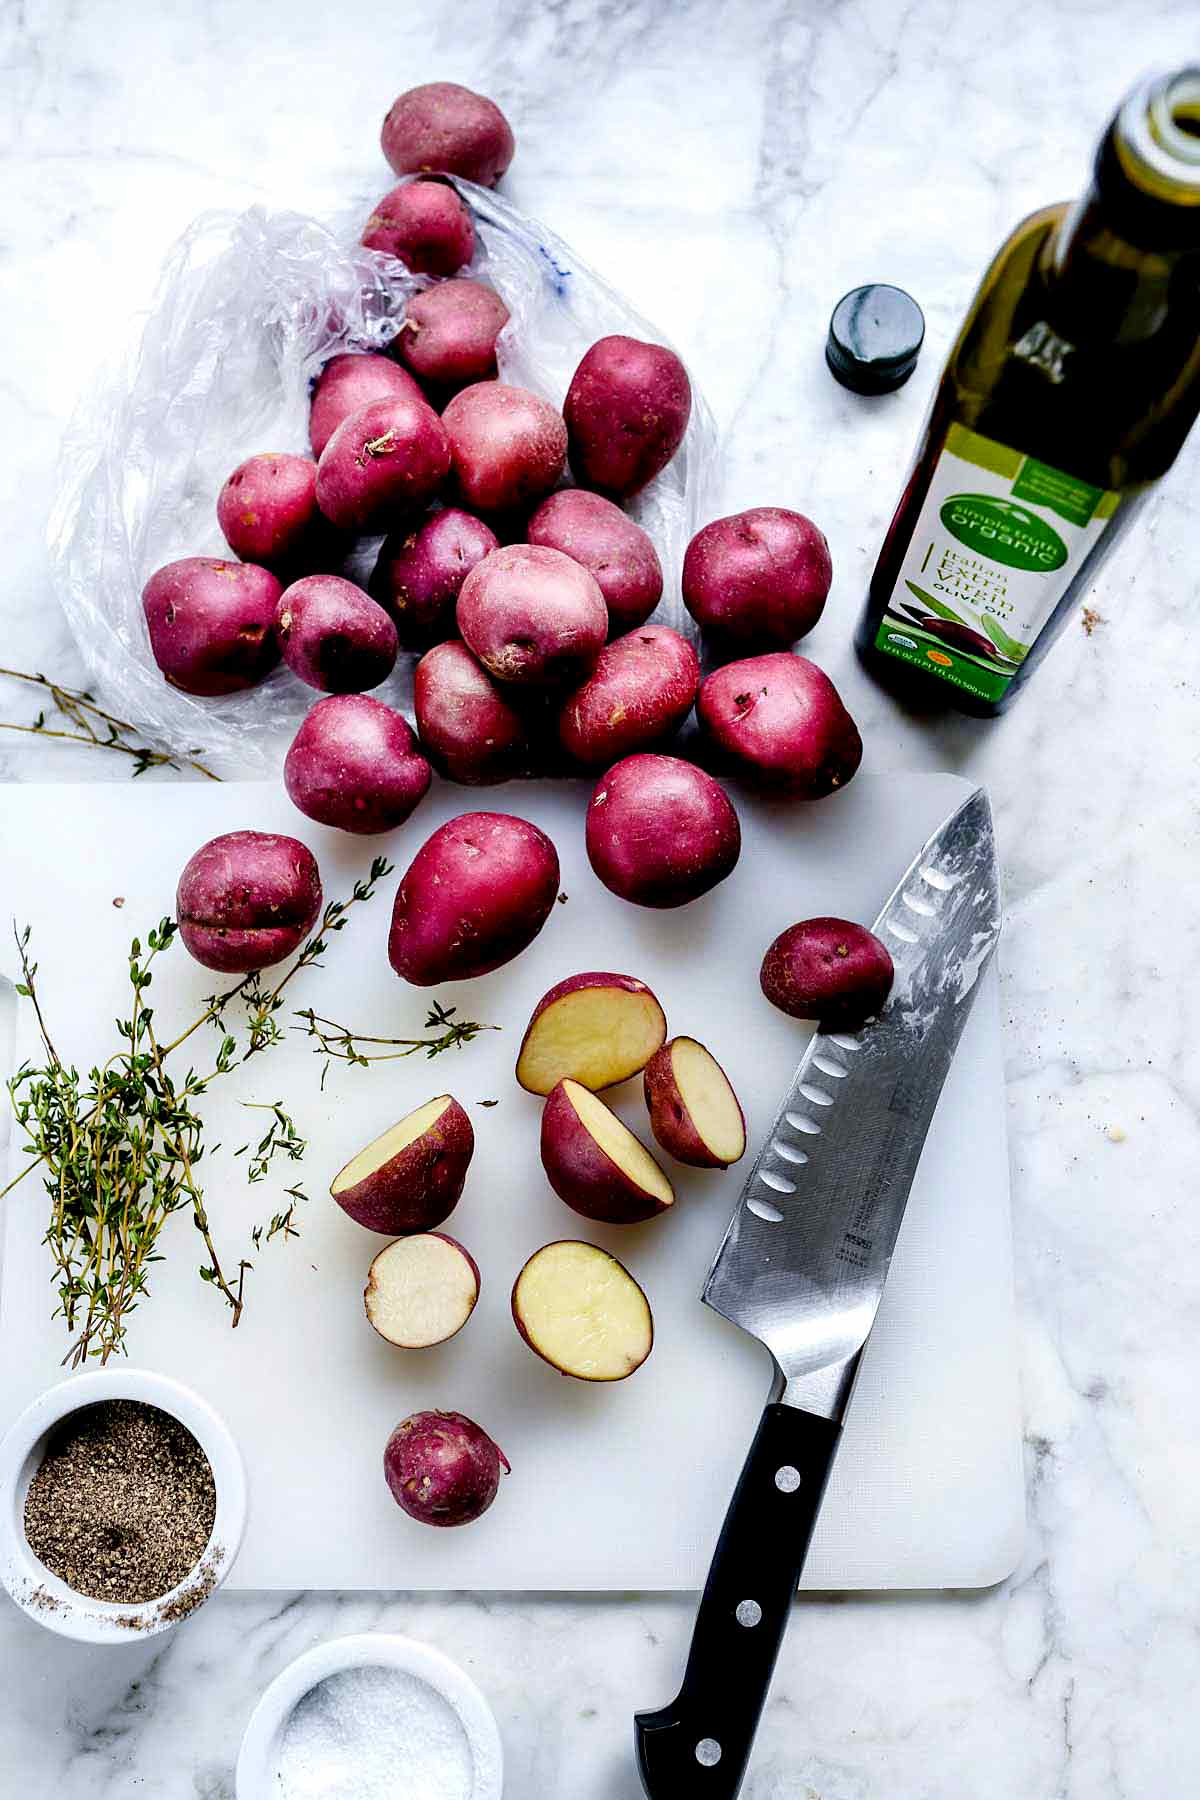 Crispy Oven-Roasted Red Mini Potatoes with Rosemary • Daisybeet